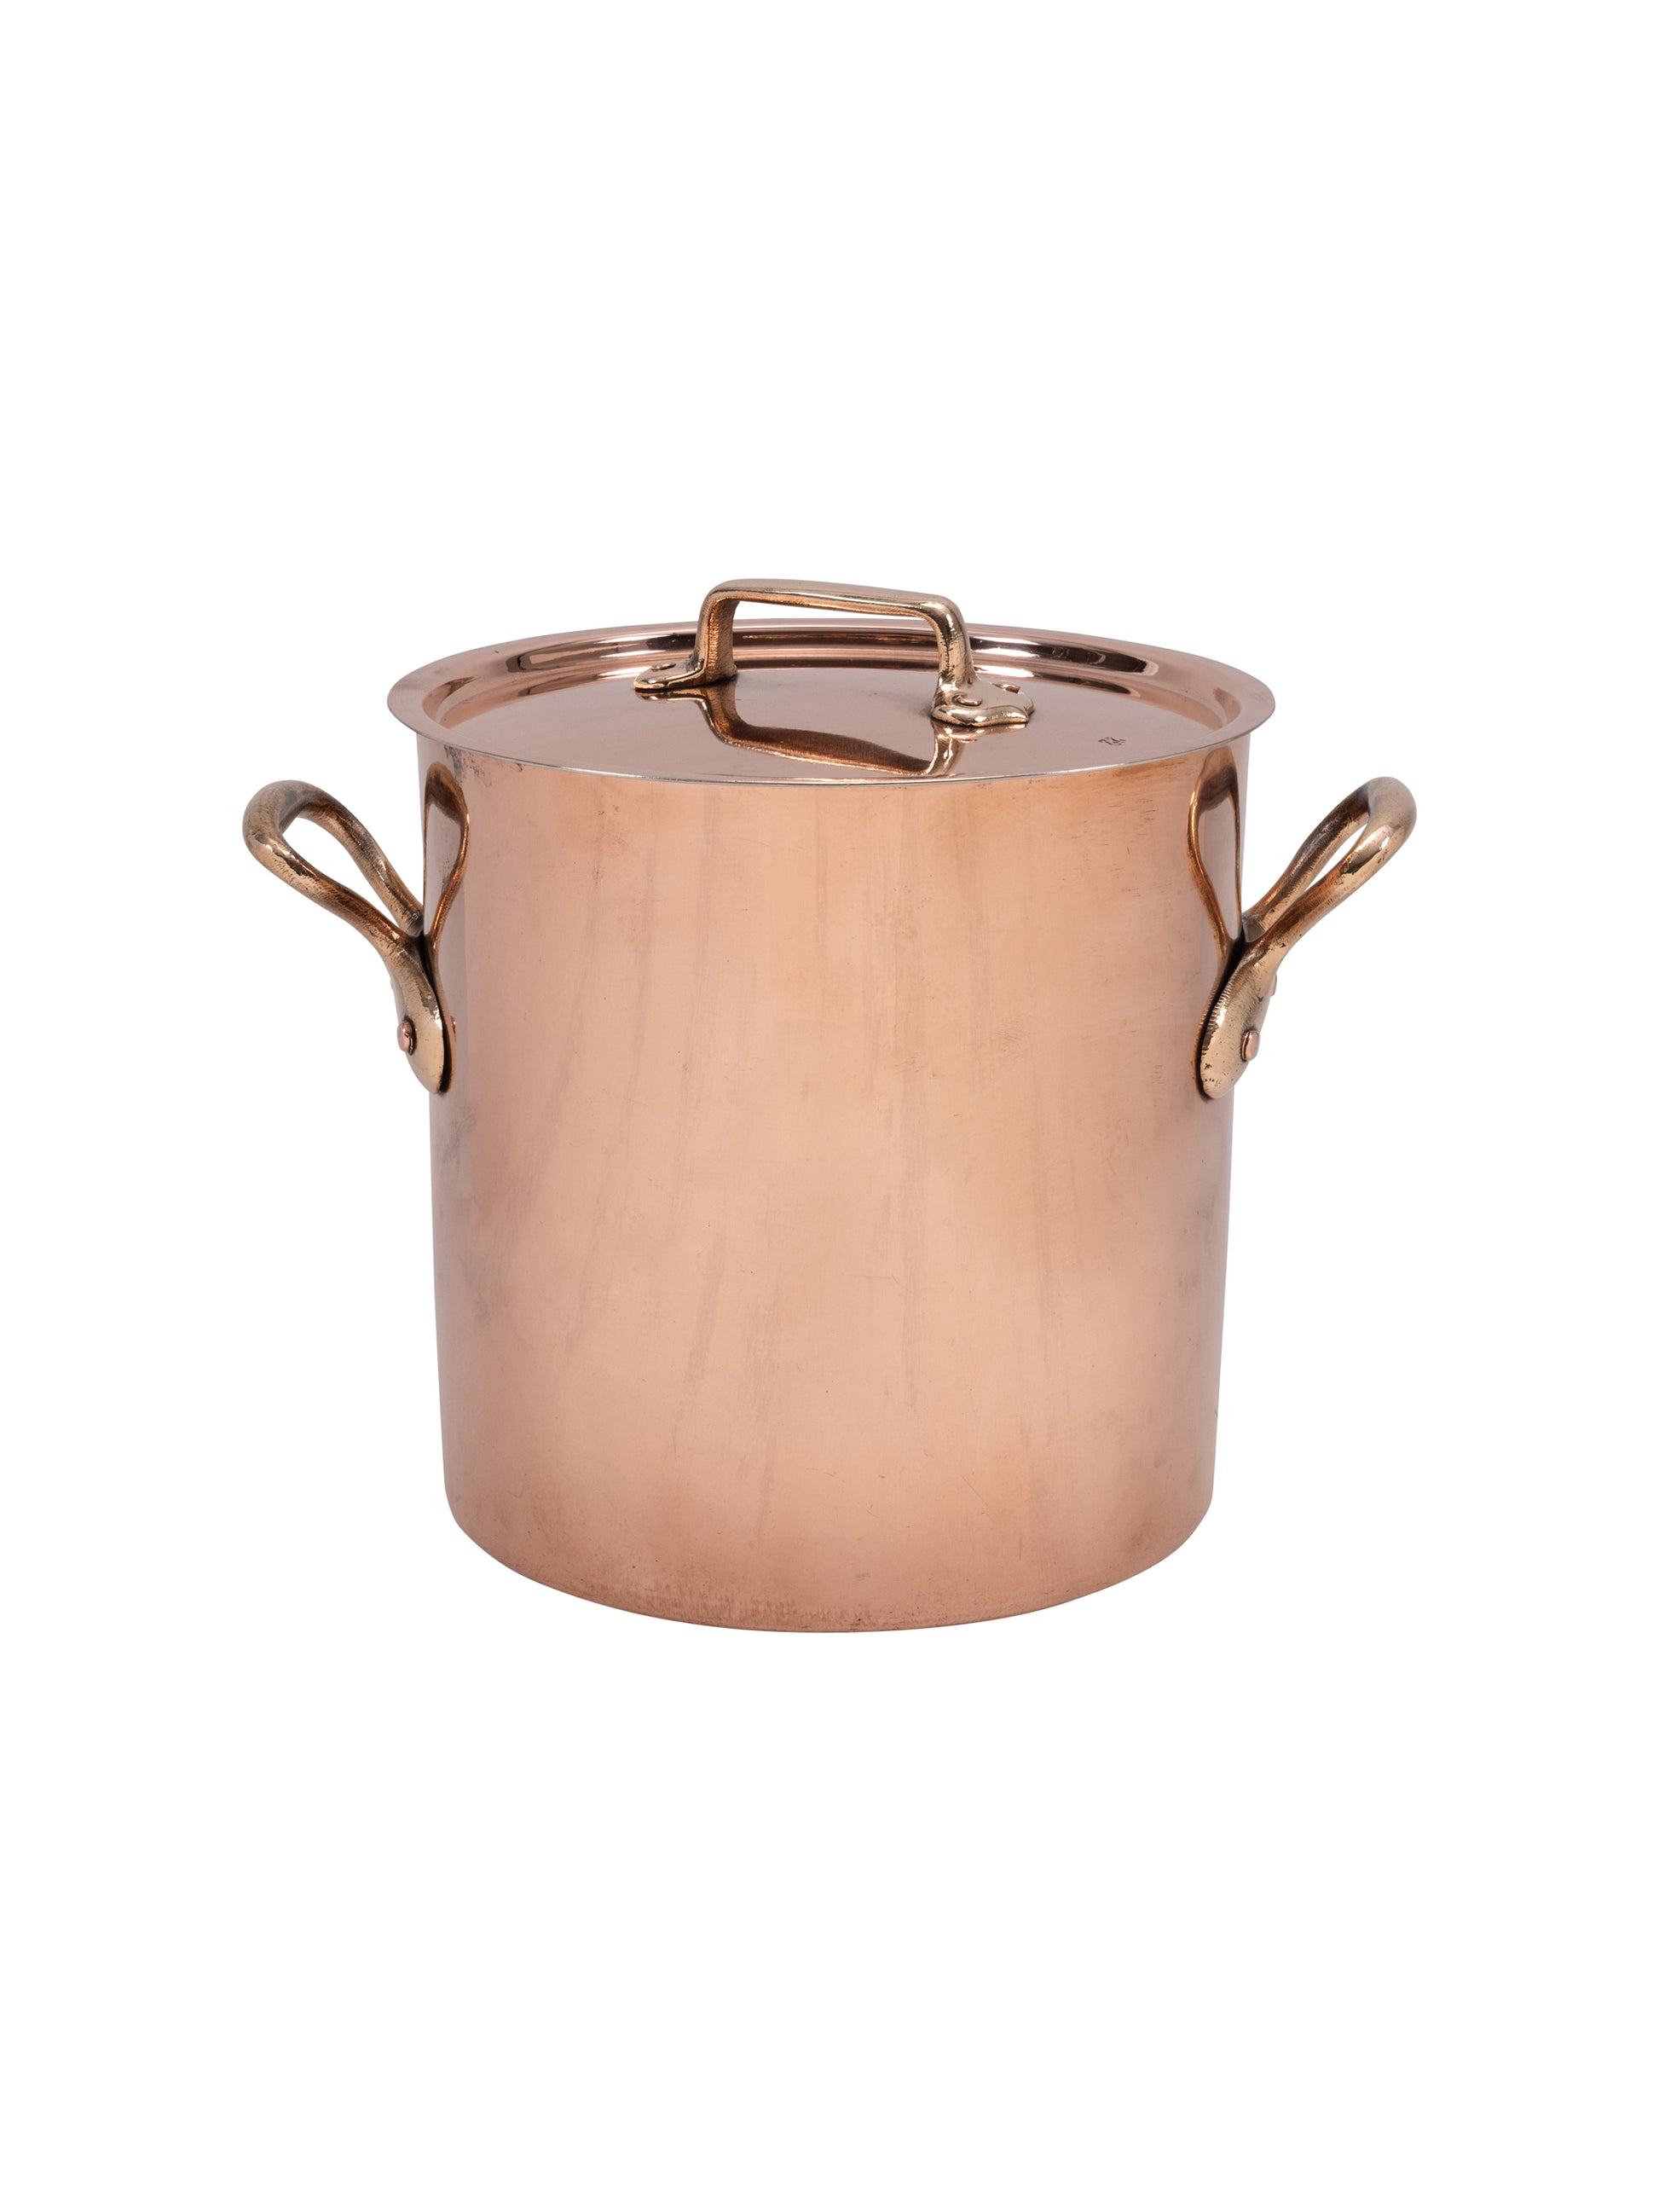 https://westontable.com/cdn/shop/files/Vintage-1890s-Small-French-Copper-Stockpot-Weston-Table-SP.jpg?v=1684754703&width=1946